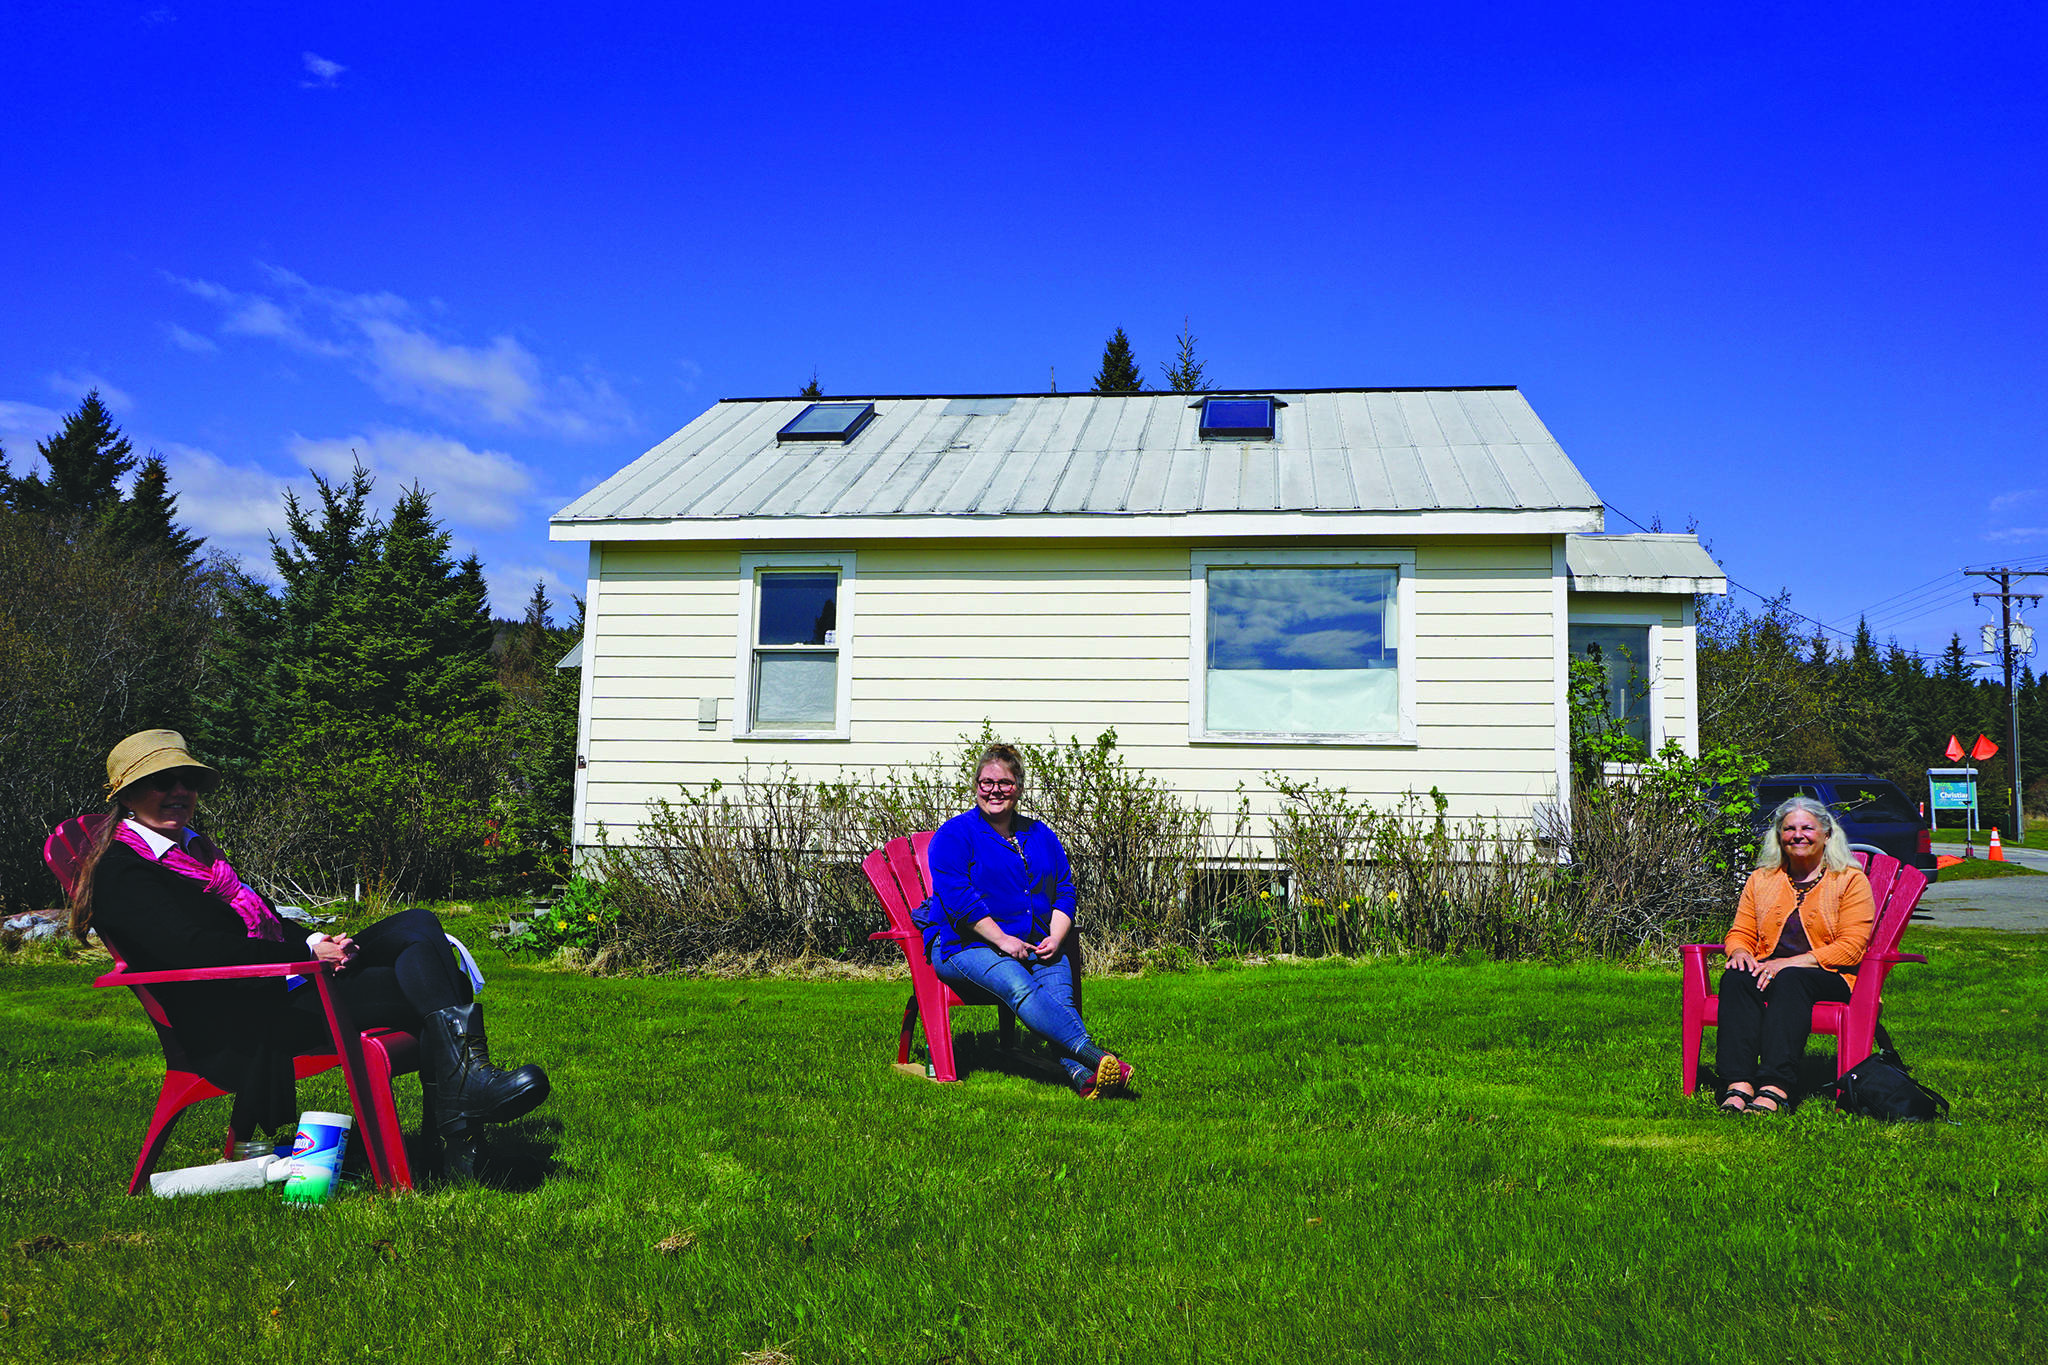 Pratt Museum officials pose for a photograph while practicing social distancing on the museum lawn on Friday, May 15, 2020, in Homer, Alaska. From left to right are Jennifer Gibbins, executive director; Savanna Bradley, curator, and Marilyn Sigman, naturalist in residence. (Photo by Michael Armstrong/Homer News)